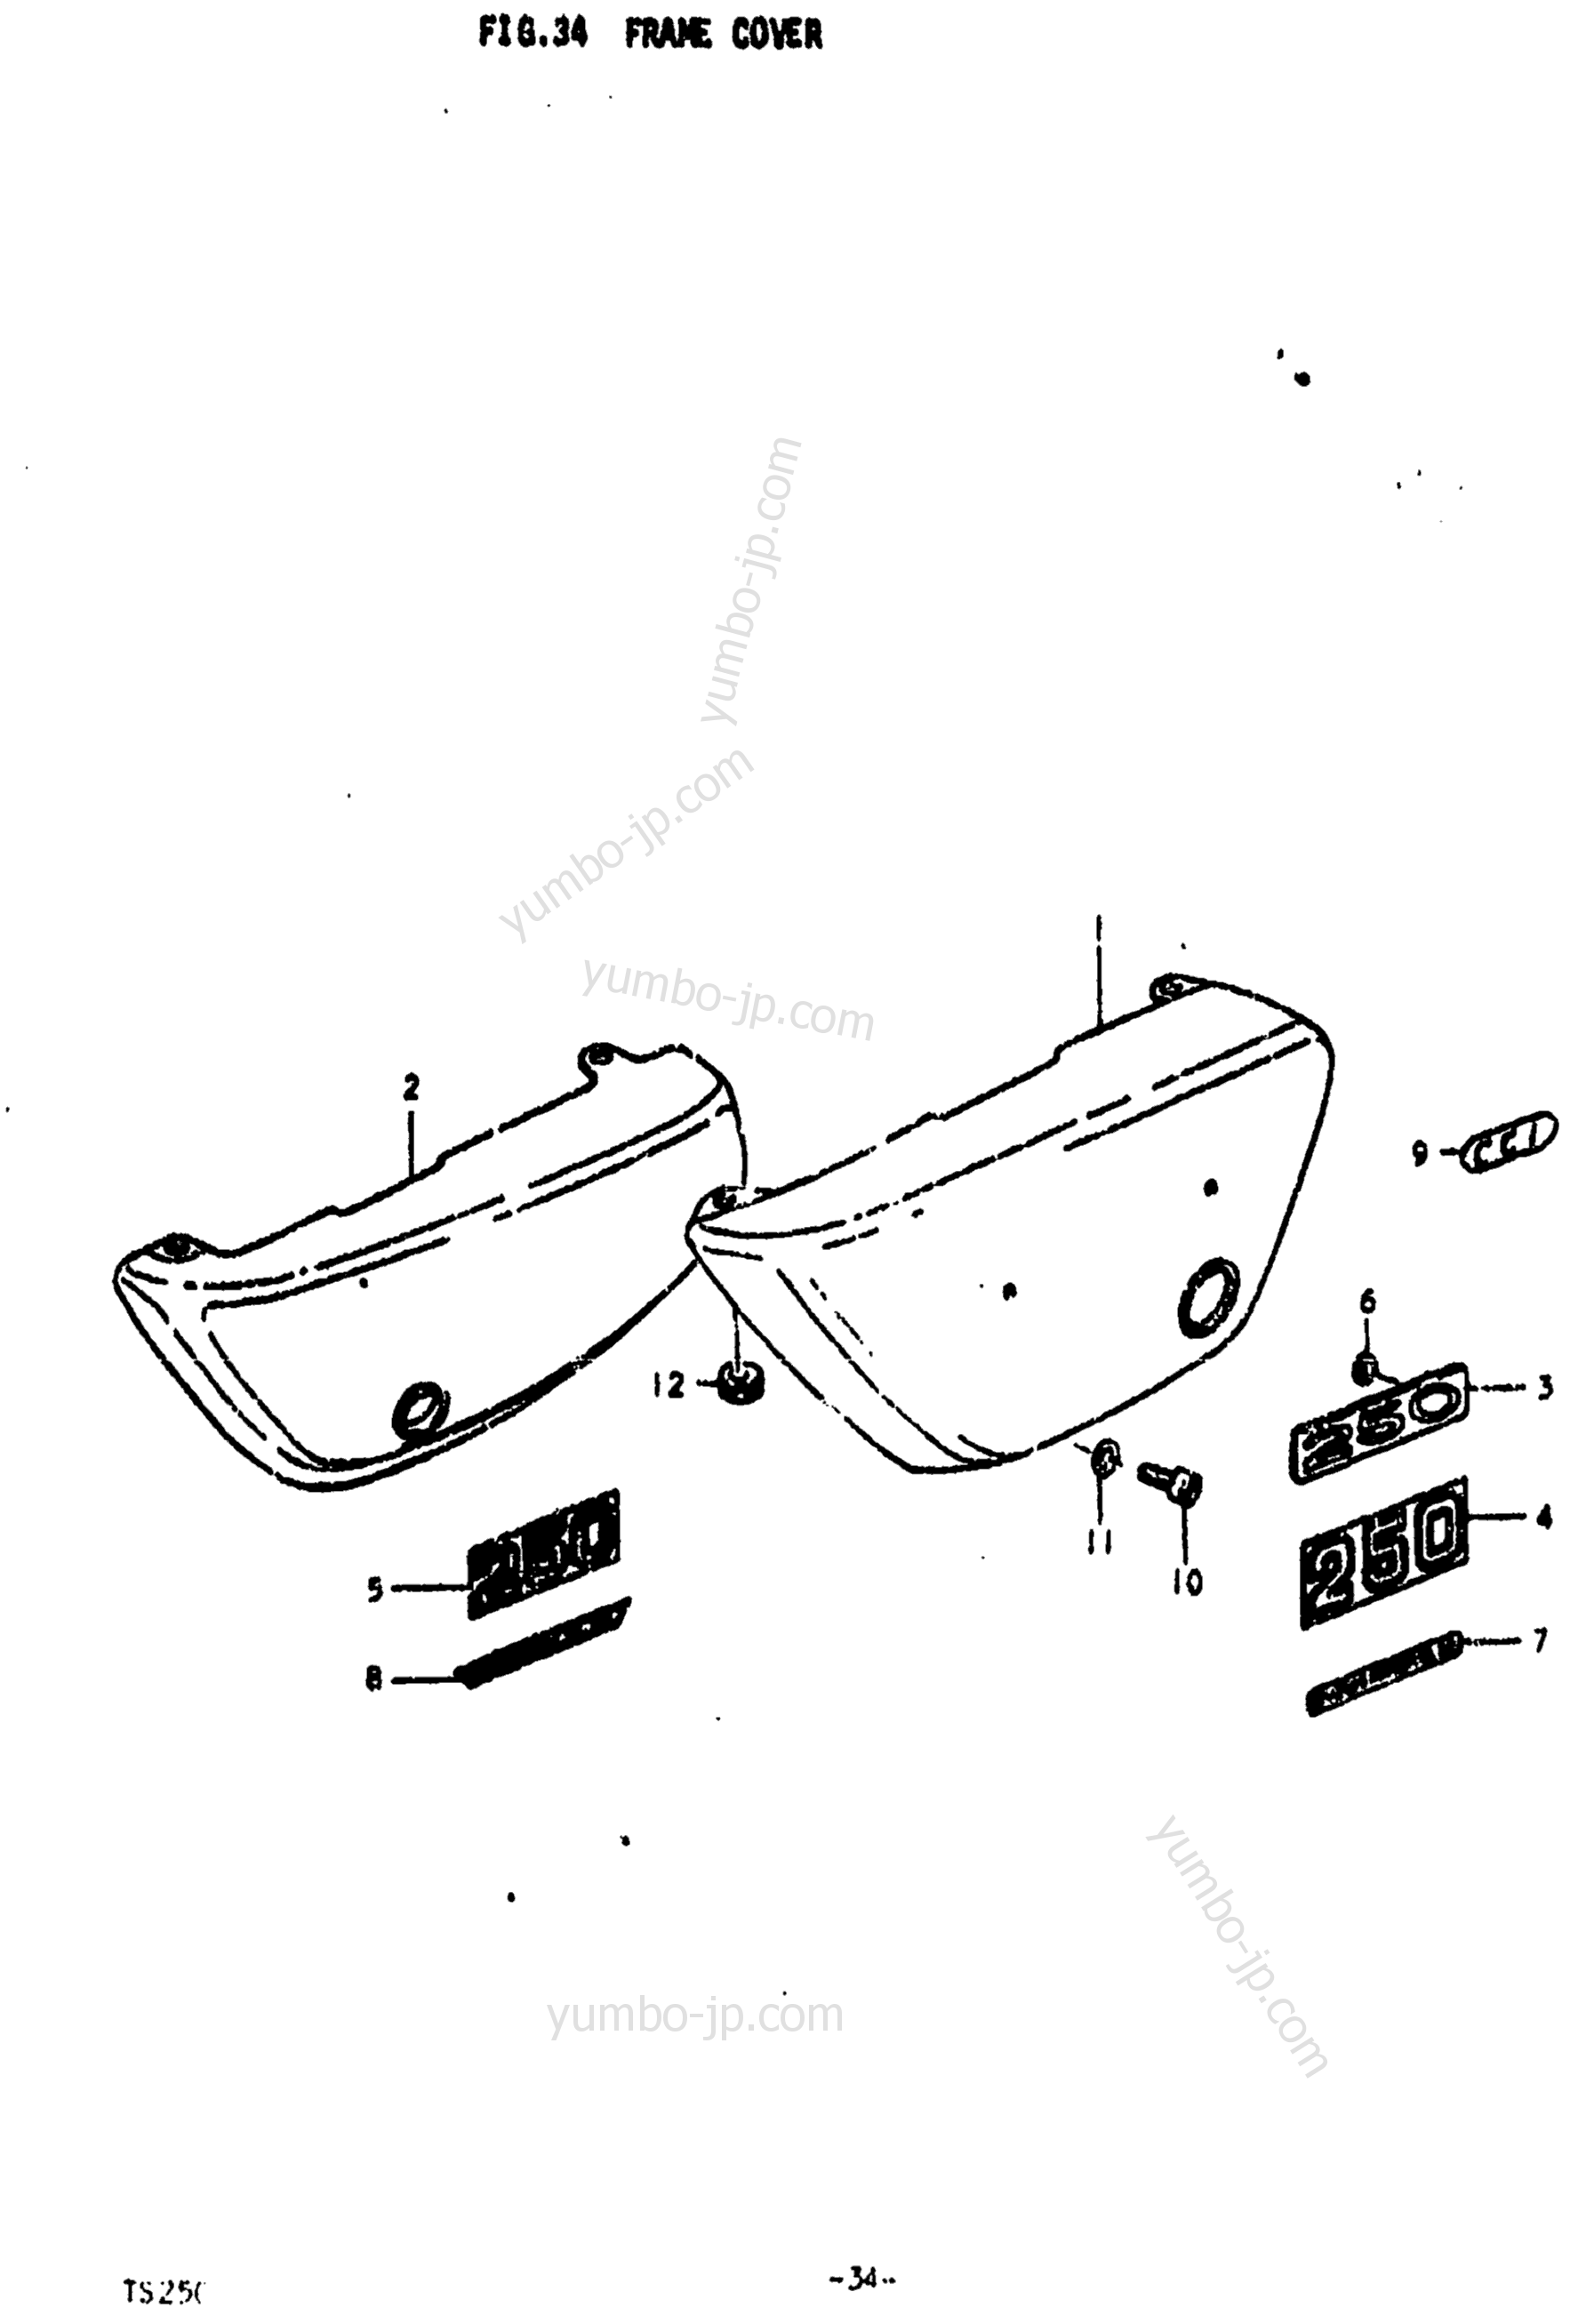 FRAME COVER for motorcycles SUZUKI TS250 1975 year